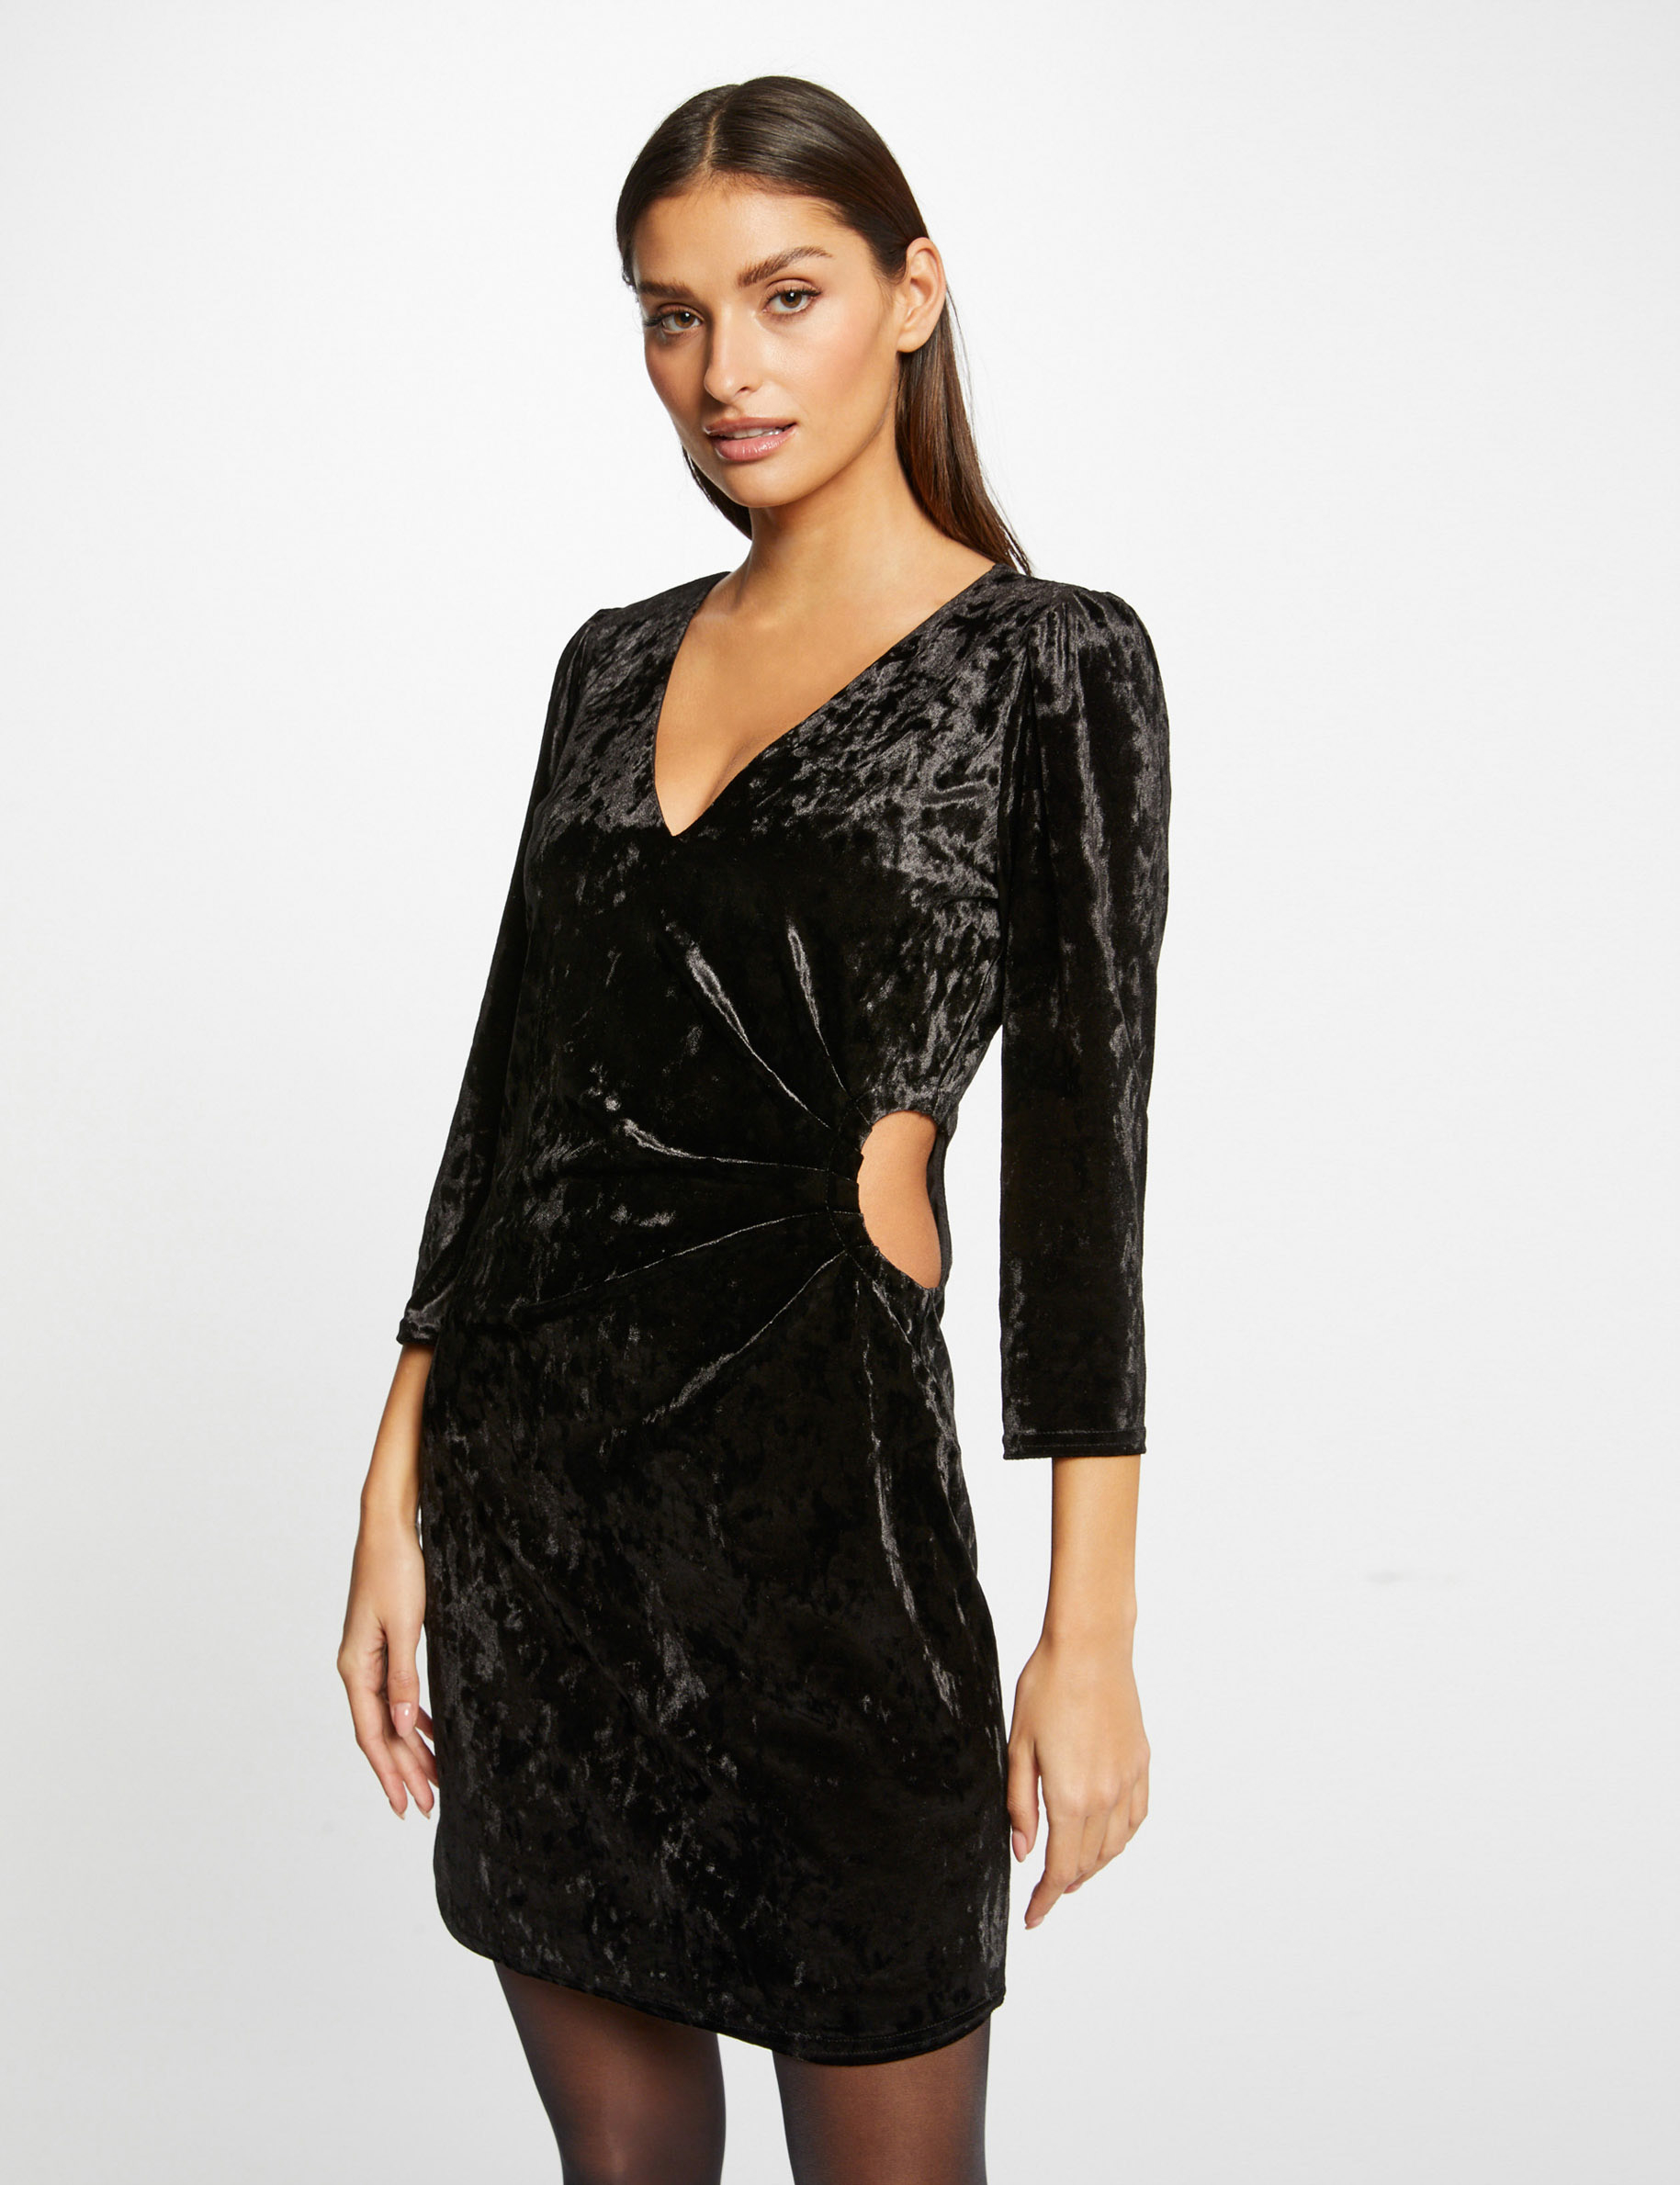 Chic Black Glitter Ruched Off-the-shoulder Evening Dress - Lunss